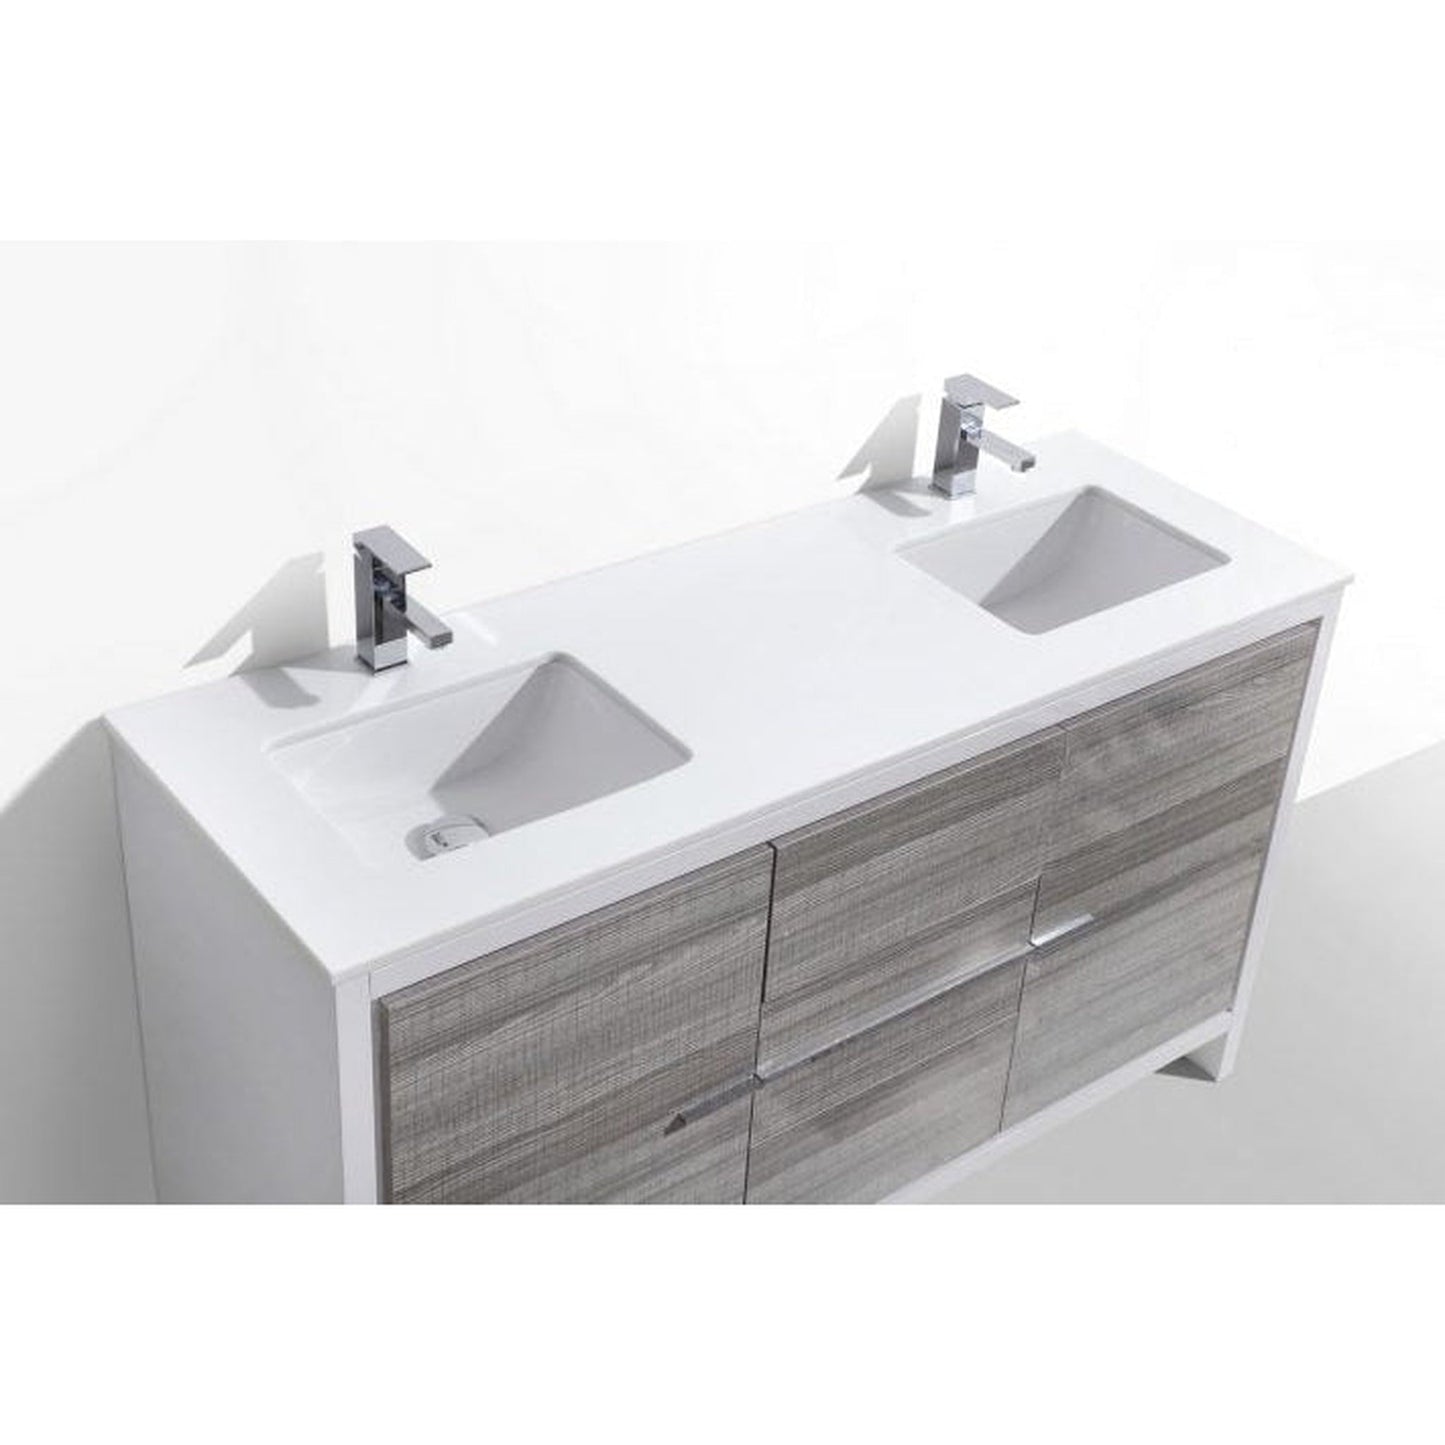 KubeBath Dolce 60" Ash Gray Freestanding Modern Bathroom Vanity With Quartz Vanity Top & Ceramic Double Sink With Overflow and 60" White Framed Mirror With Shelf